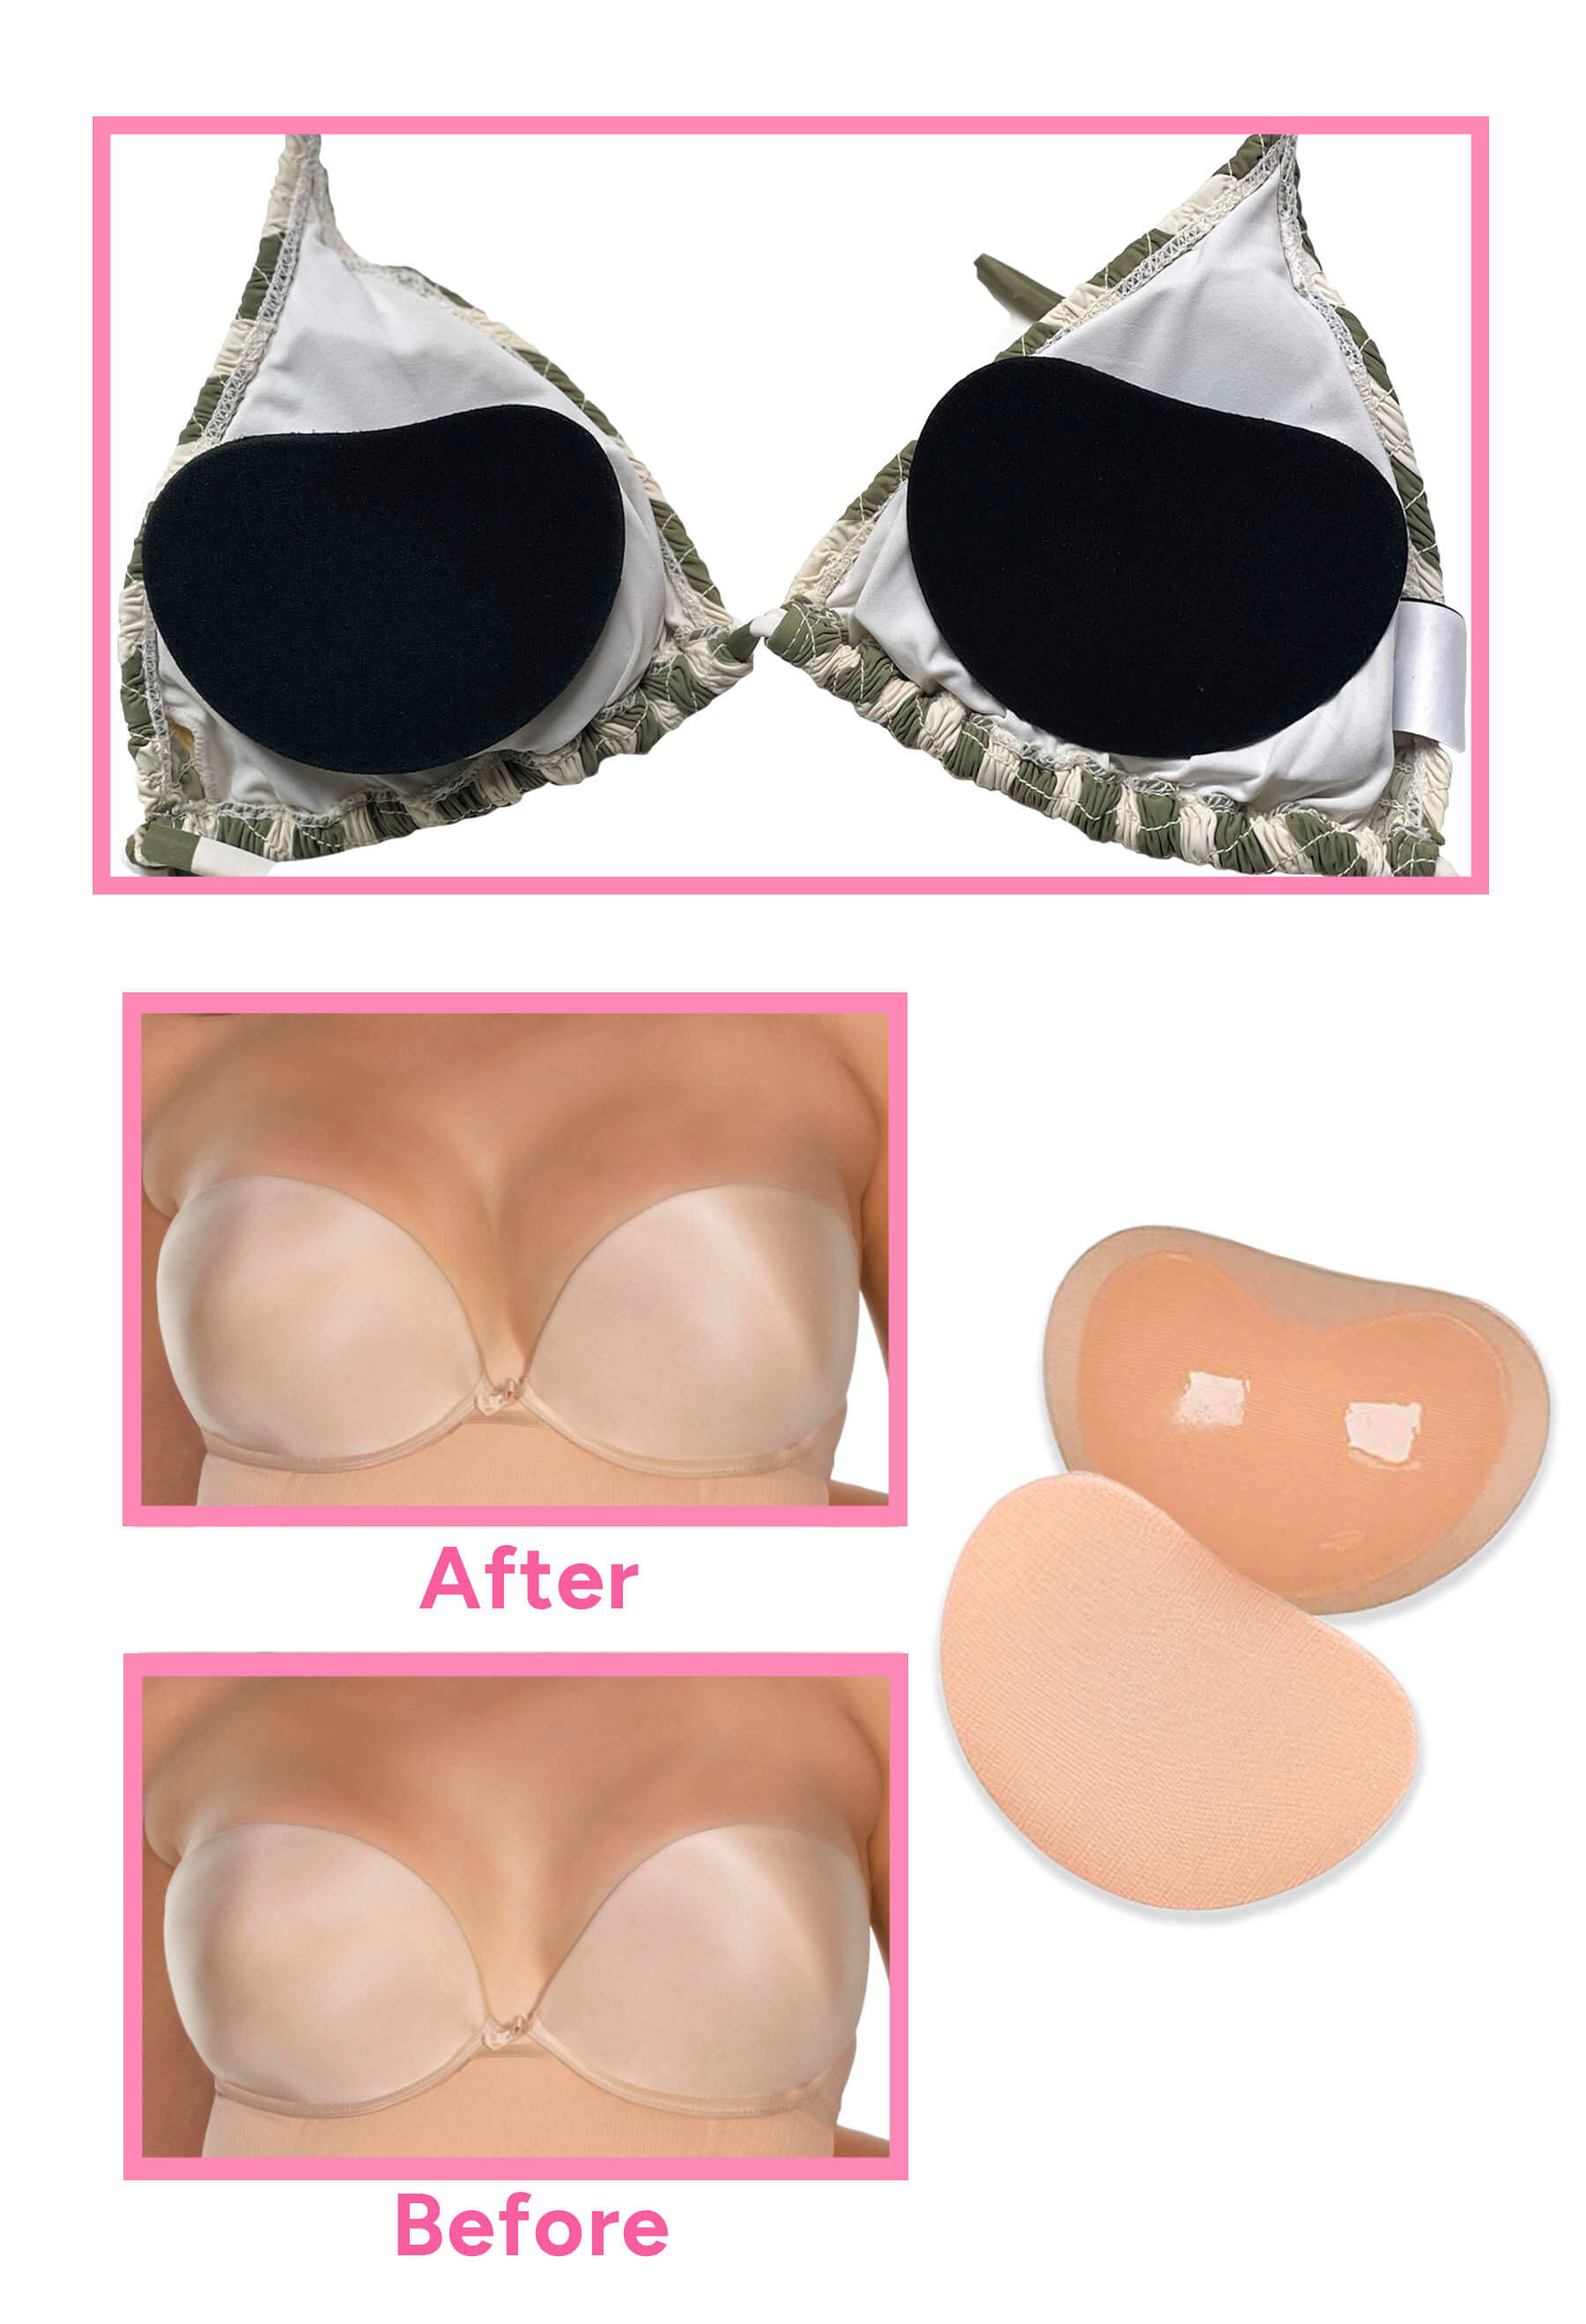 Buy D Club Silicone Bra Inserts Push up Breast Cups Enhancers pads (Clear)  at